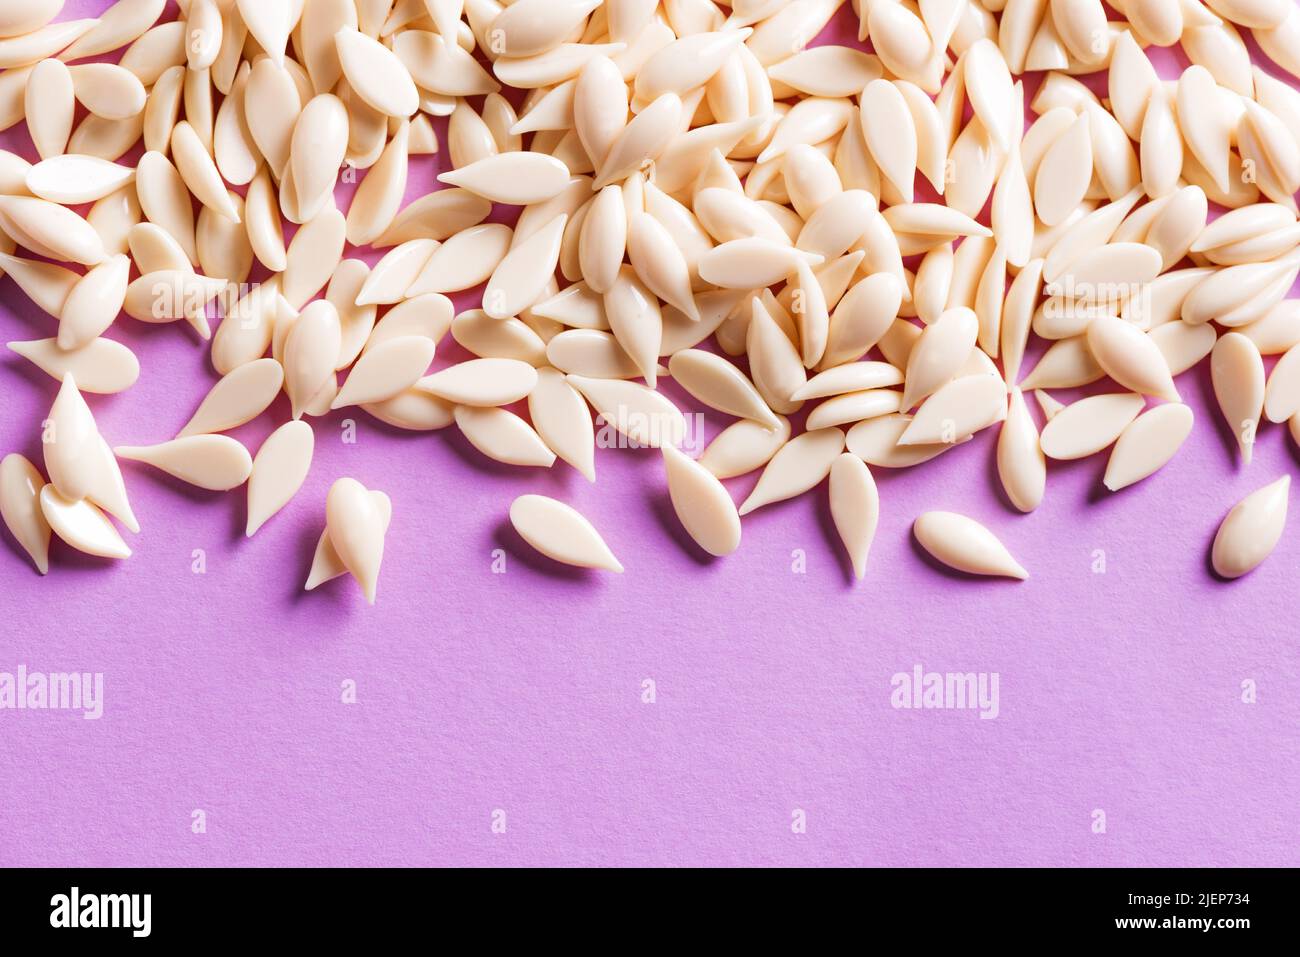 Granular film wax bean granules on purple background, copy space. Natural hair removal, natural beauty concept,  pearl wax. Stock Photo